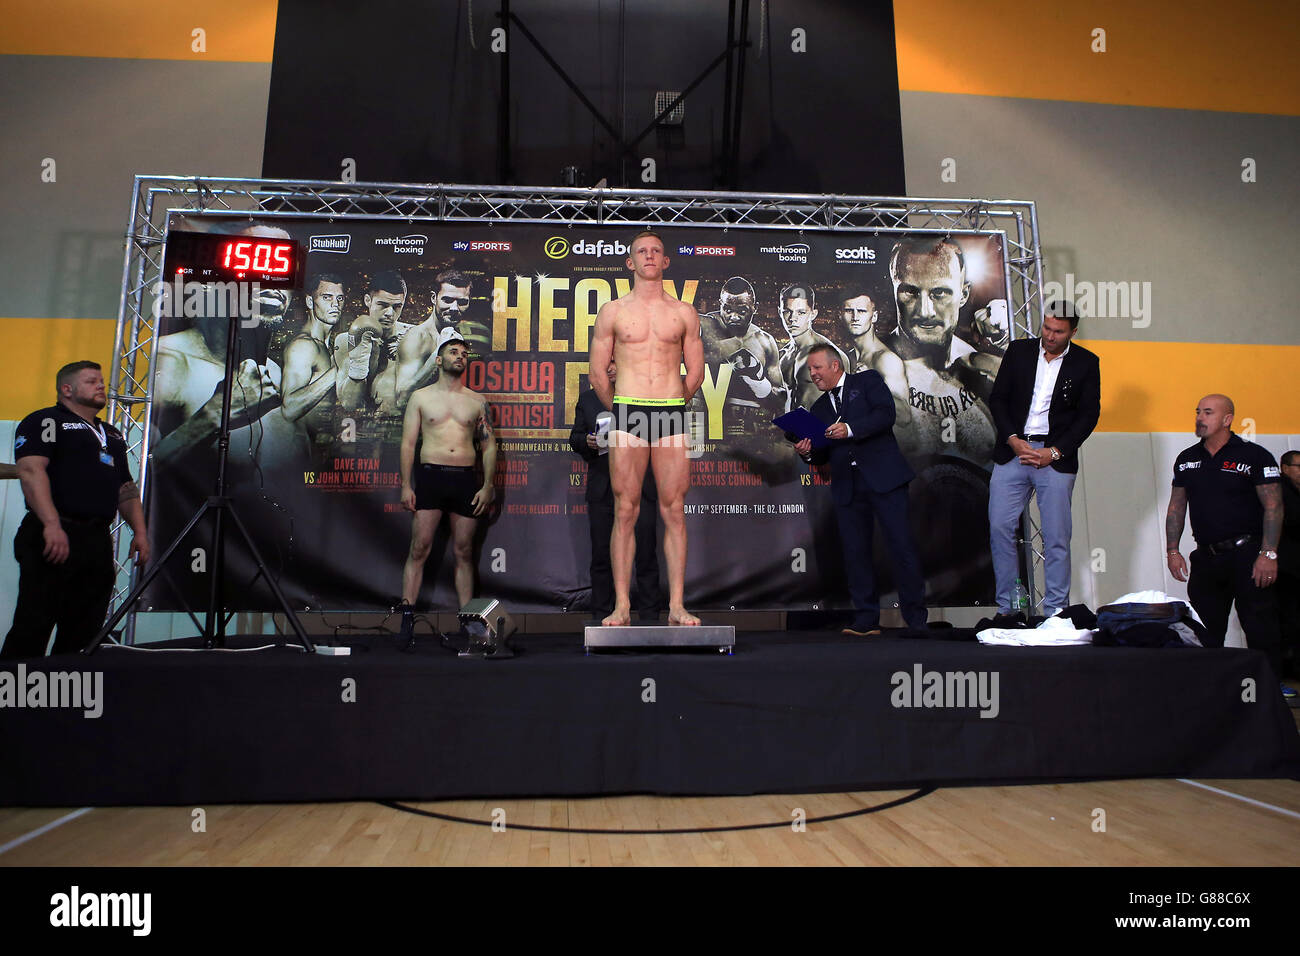 Boxing - Boxers Weigh In - Reebok Club London Stock Photo - Alamy